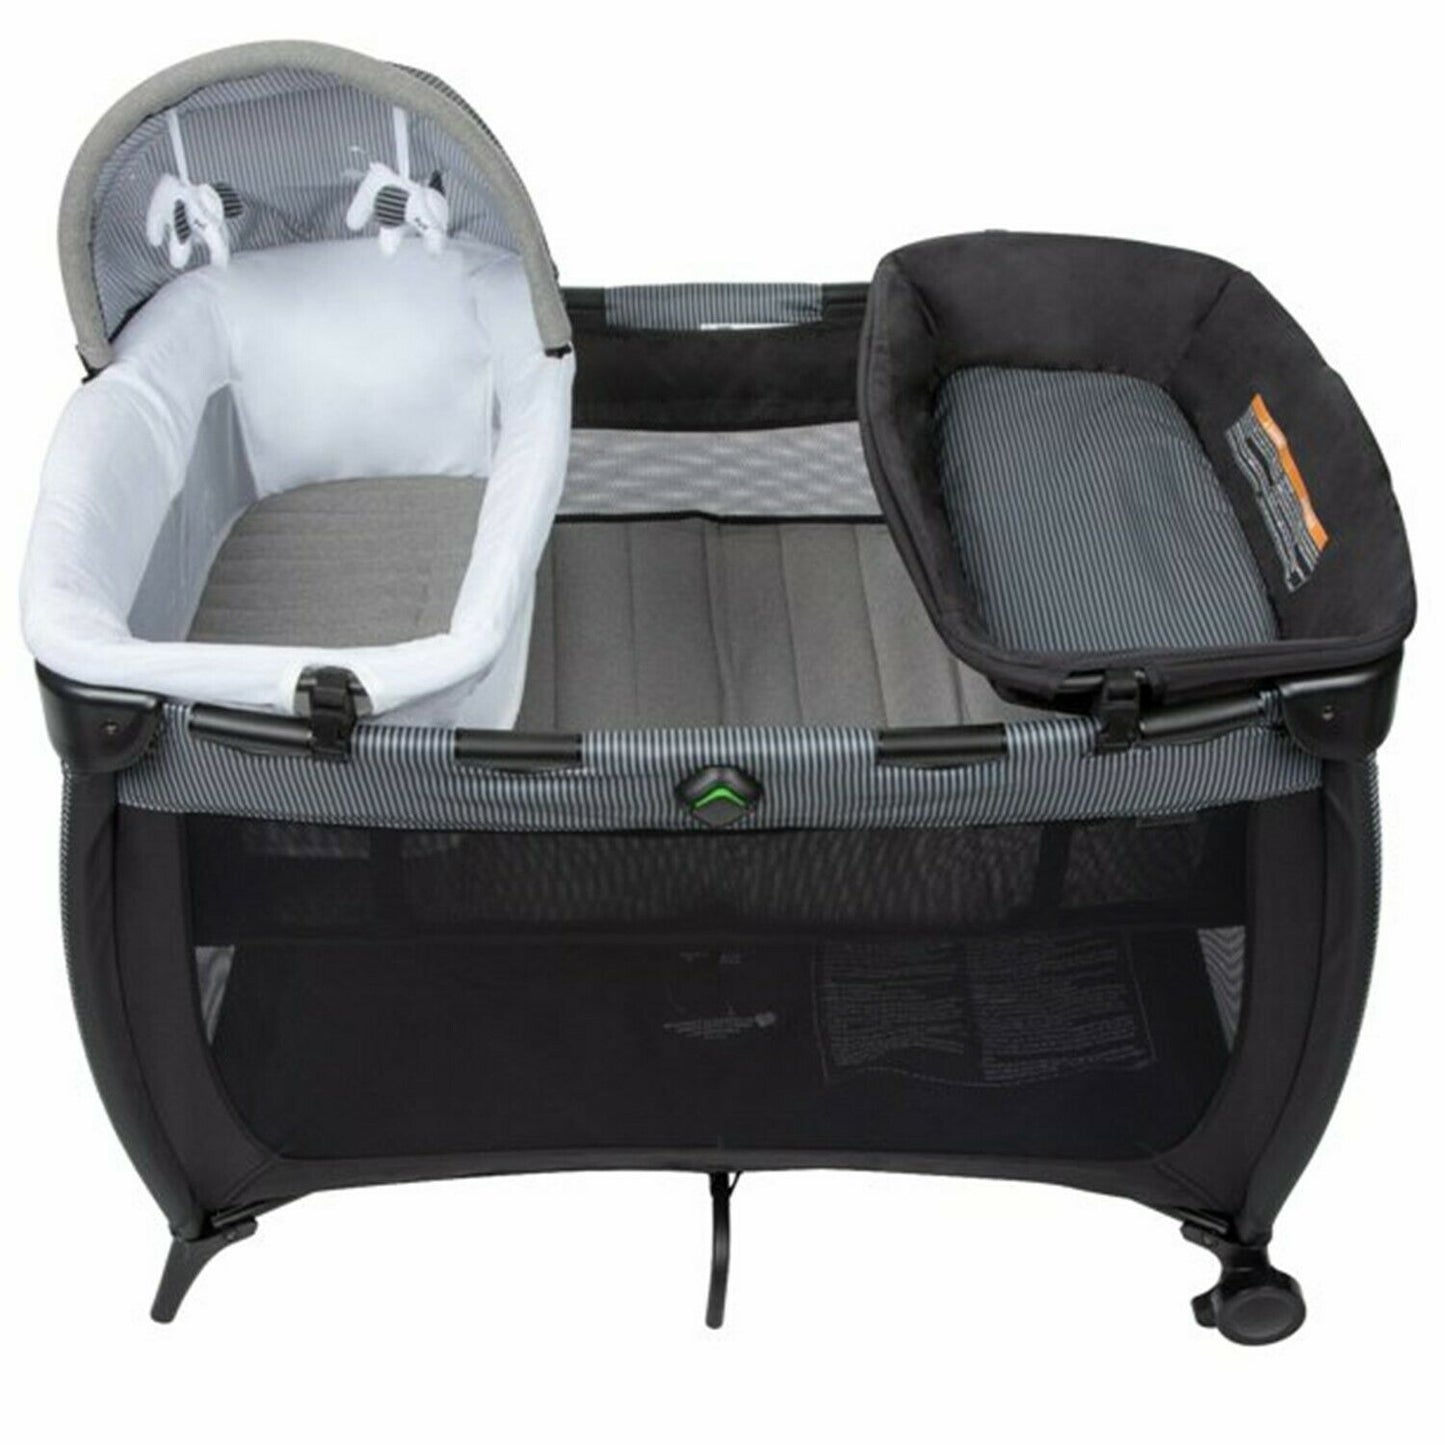 Baby Stroller with Car Seat Playard Bassinet Swing Travel System Combo Newborn